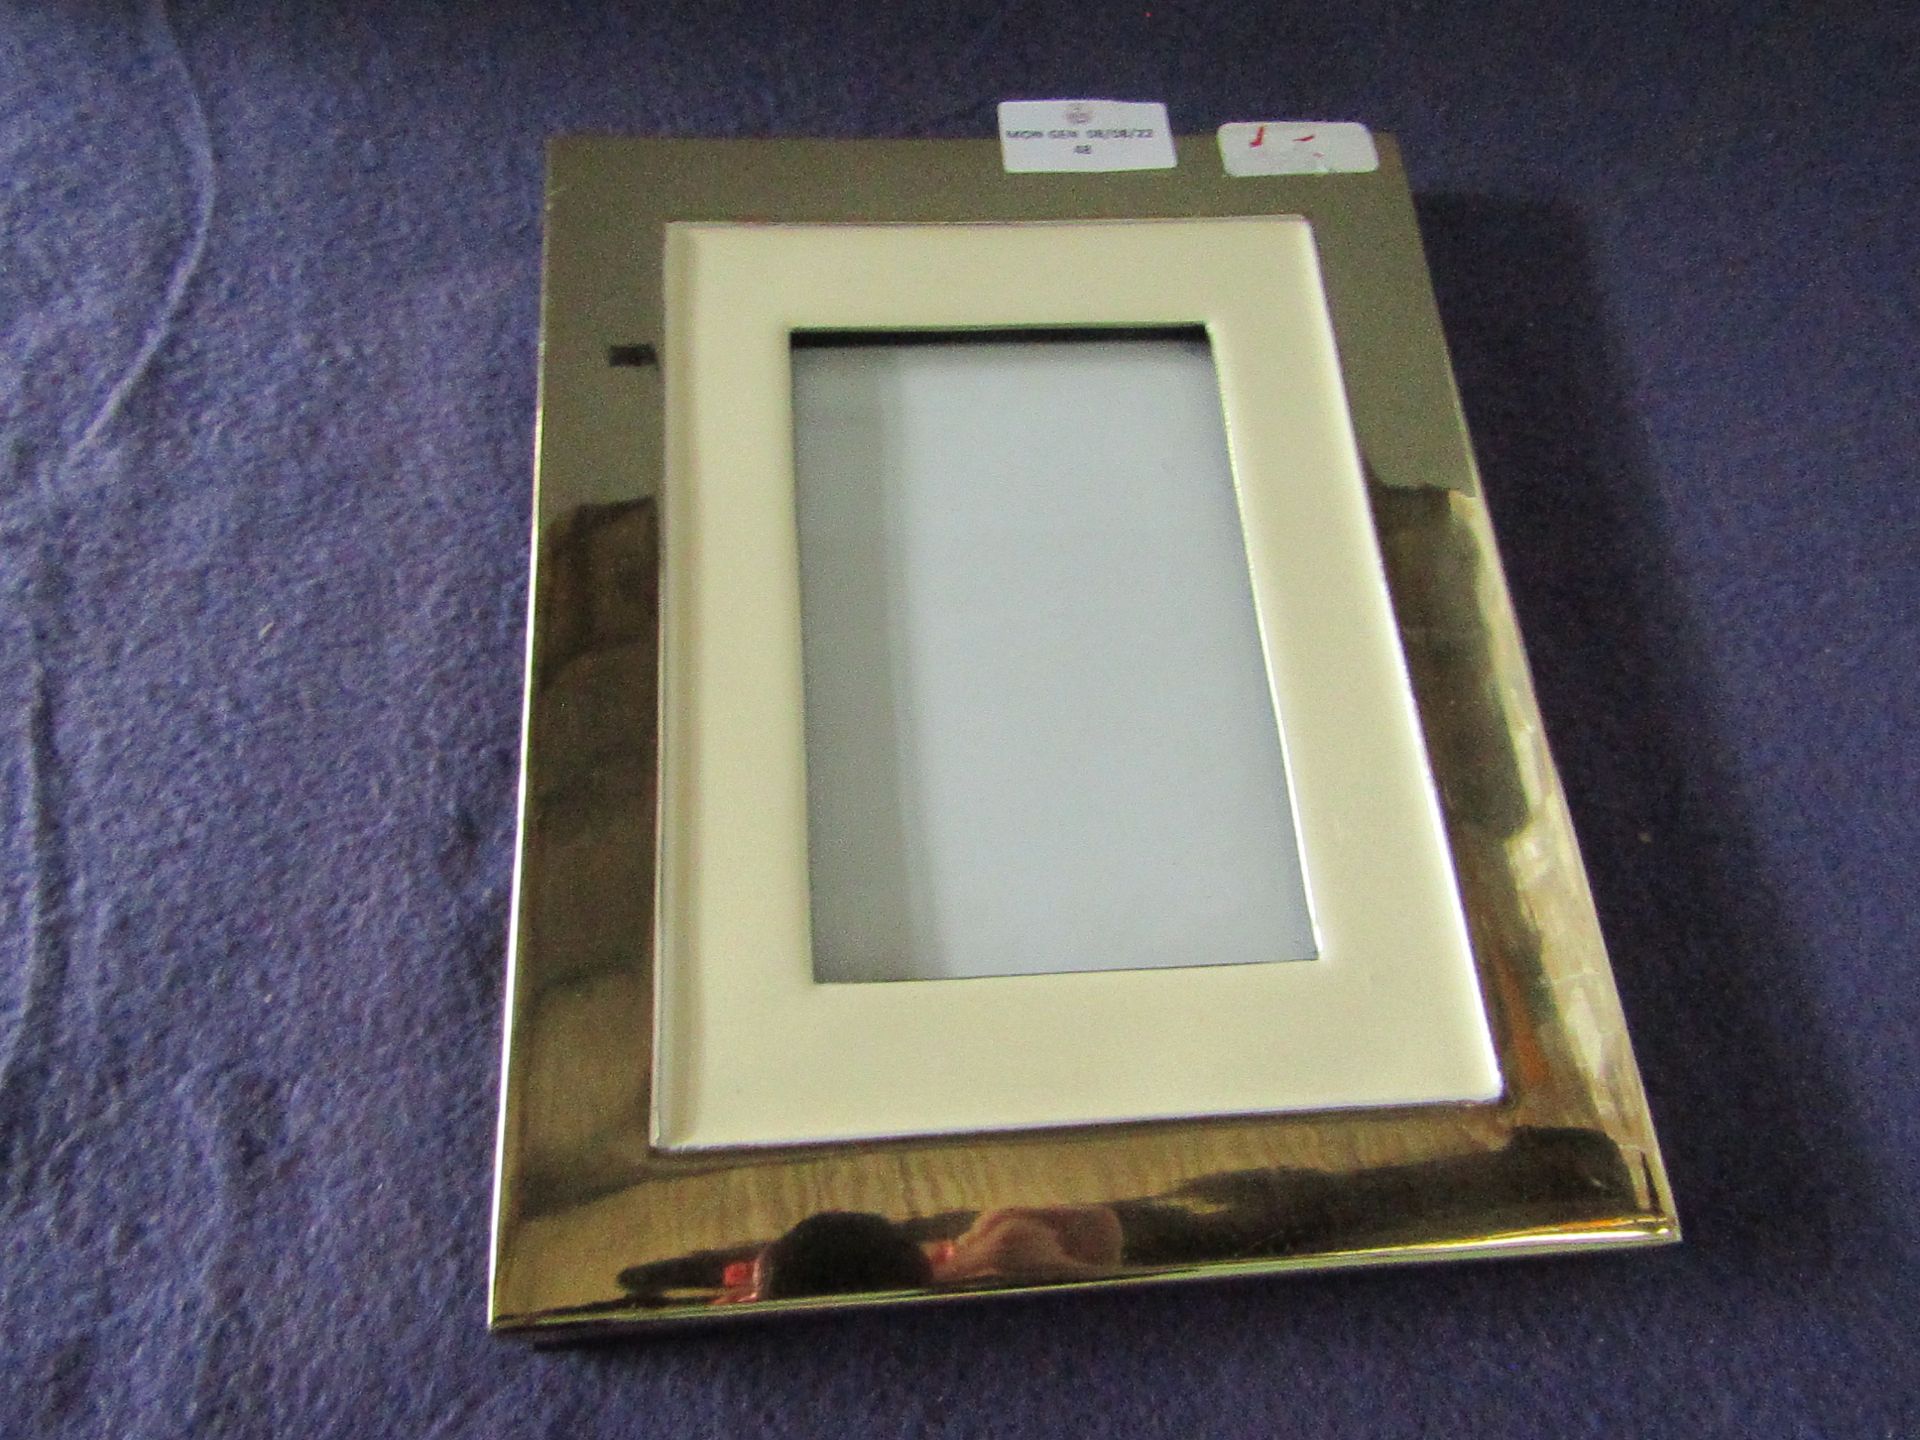 Rowen Group Ansel Medium Gold Glass Metal Photo Frame RRP Â£29.00 - This item looks to be in good